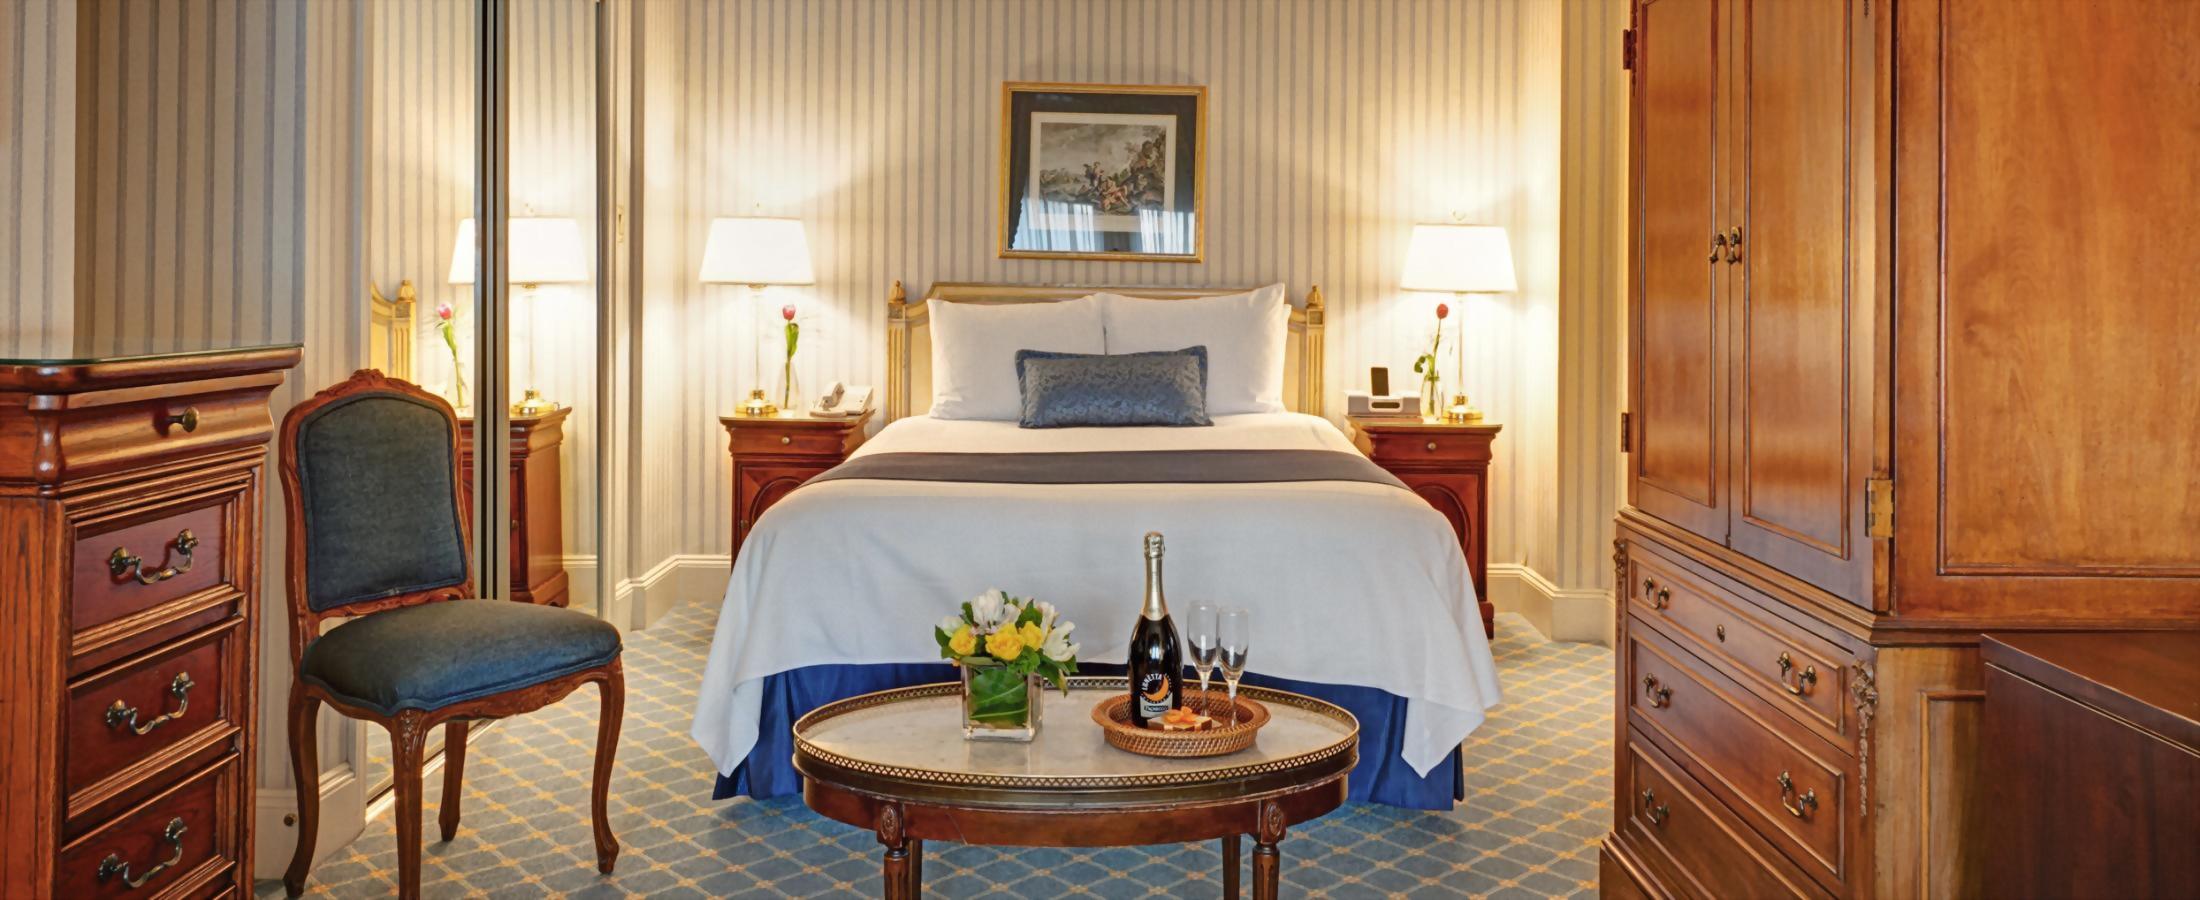 Deluxe Queen Room with 1 Queen Bed at New York City's Hotel Elysee